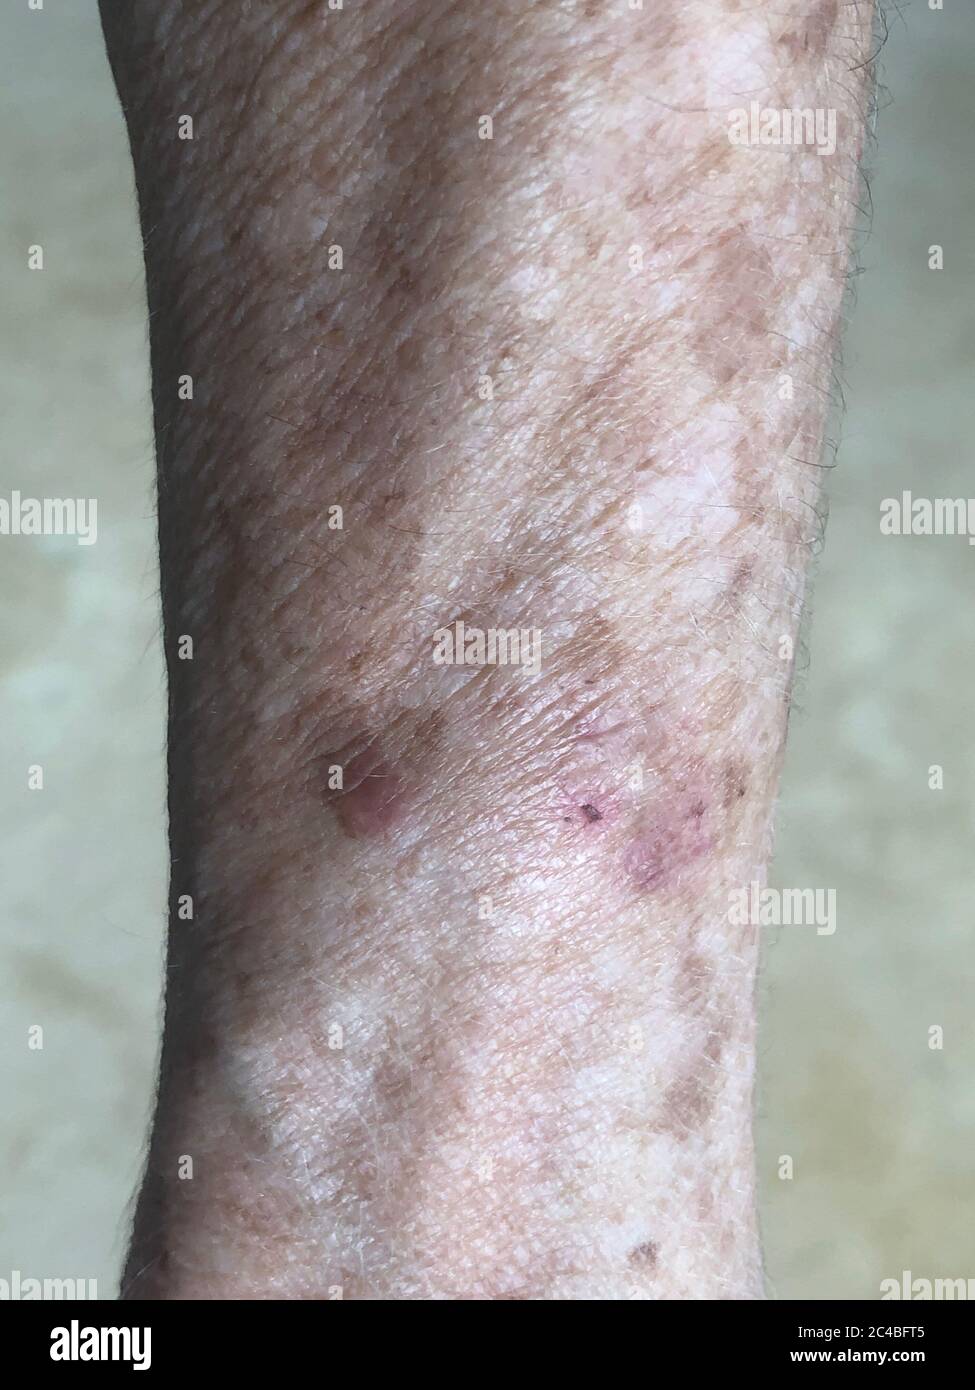 Age Spots On The Forearm Of A 72 Year Old Woman Stock Photo Alamy